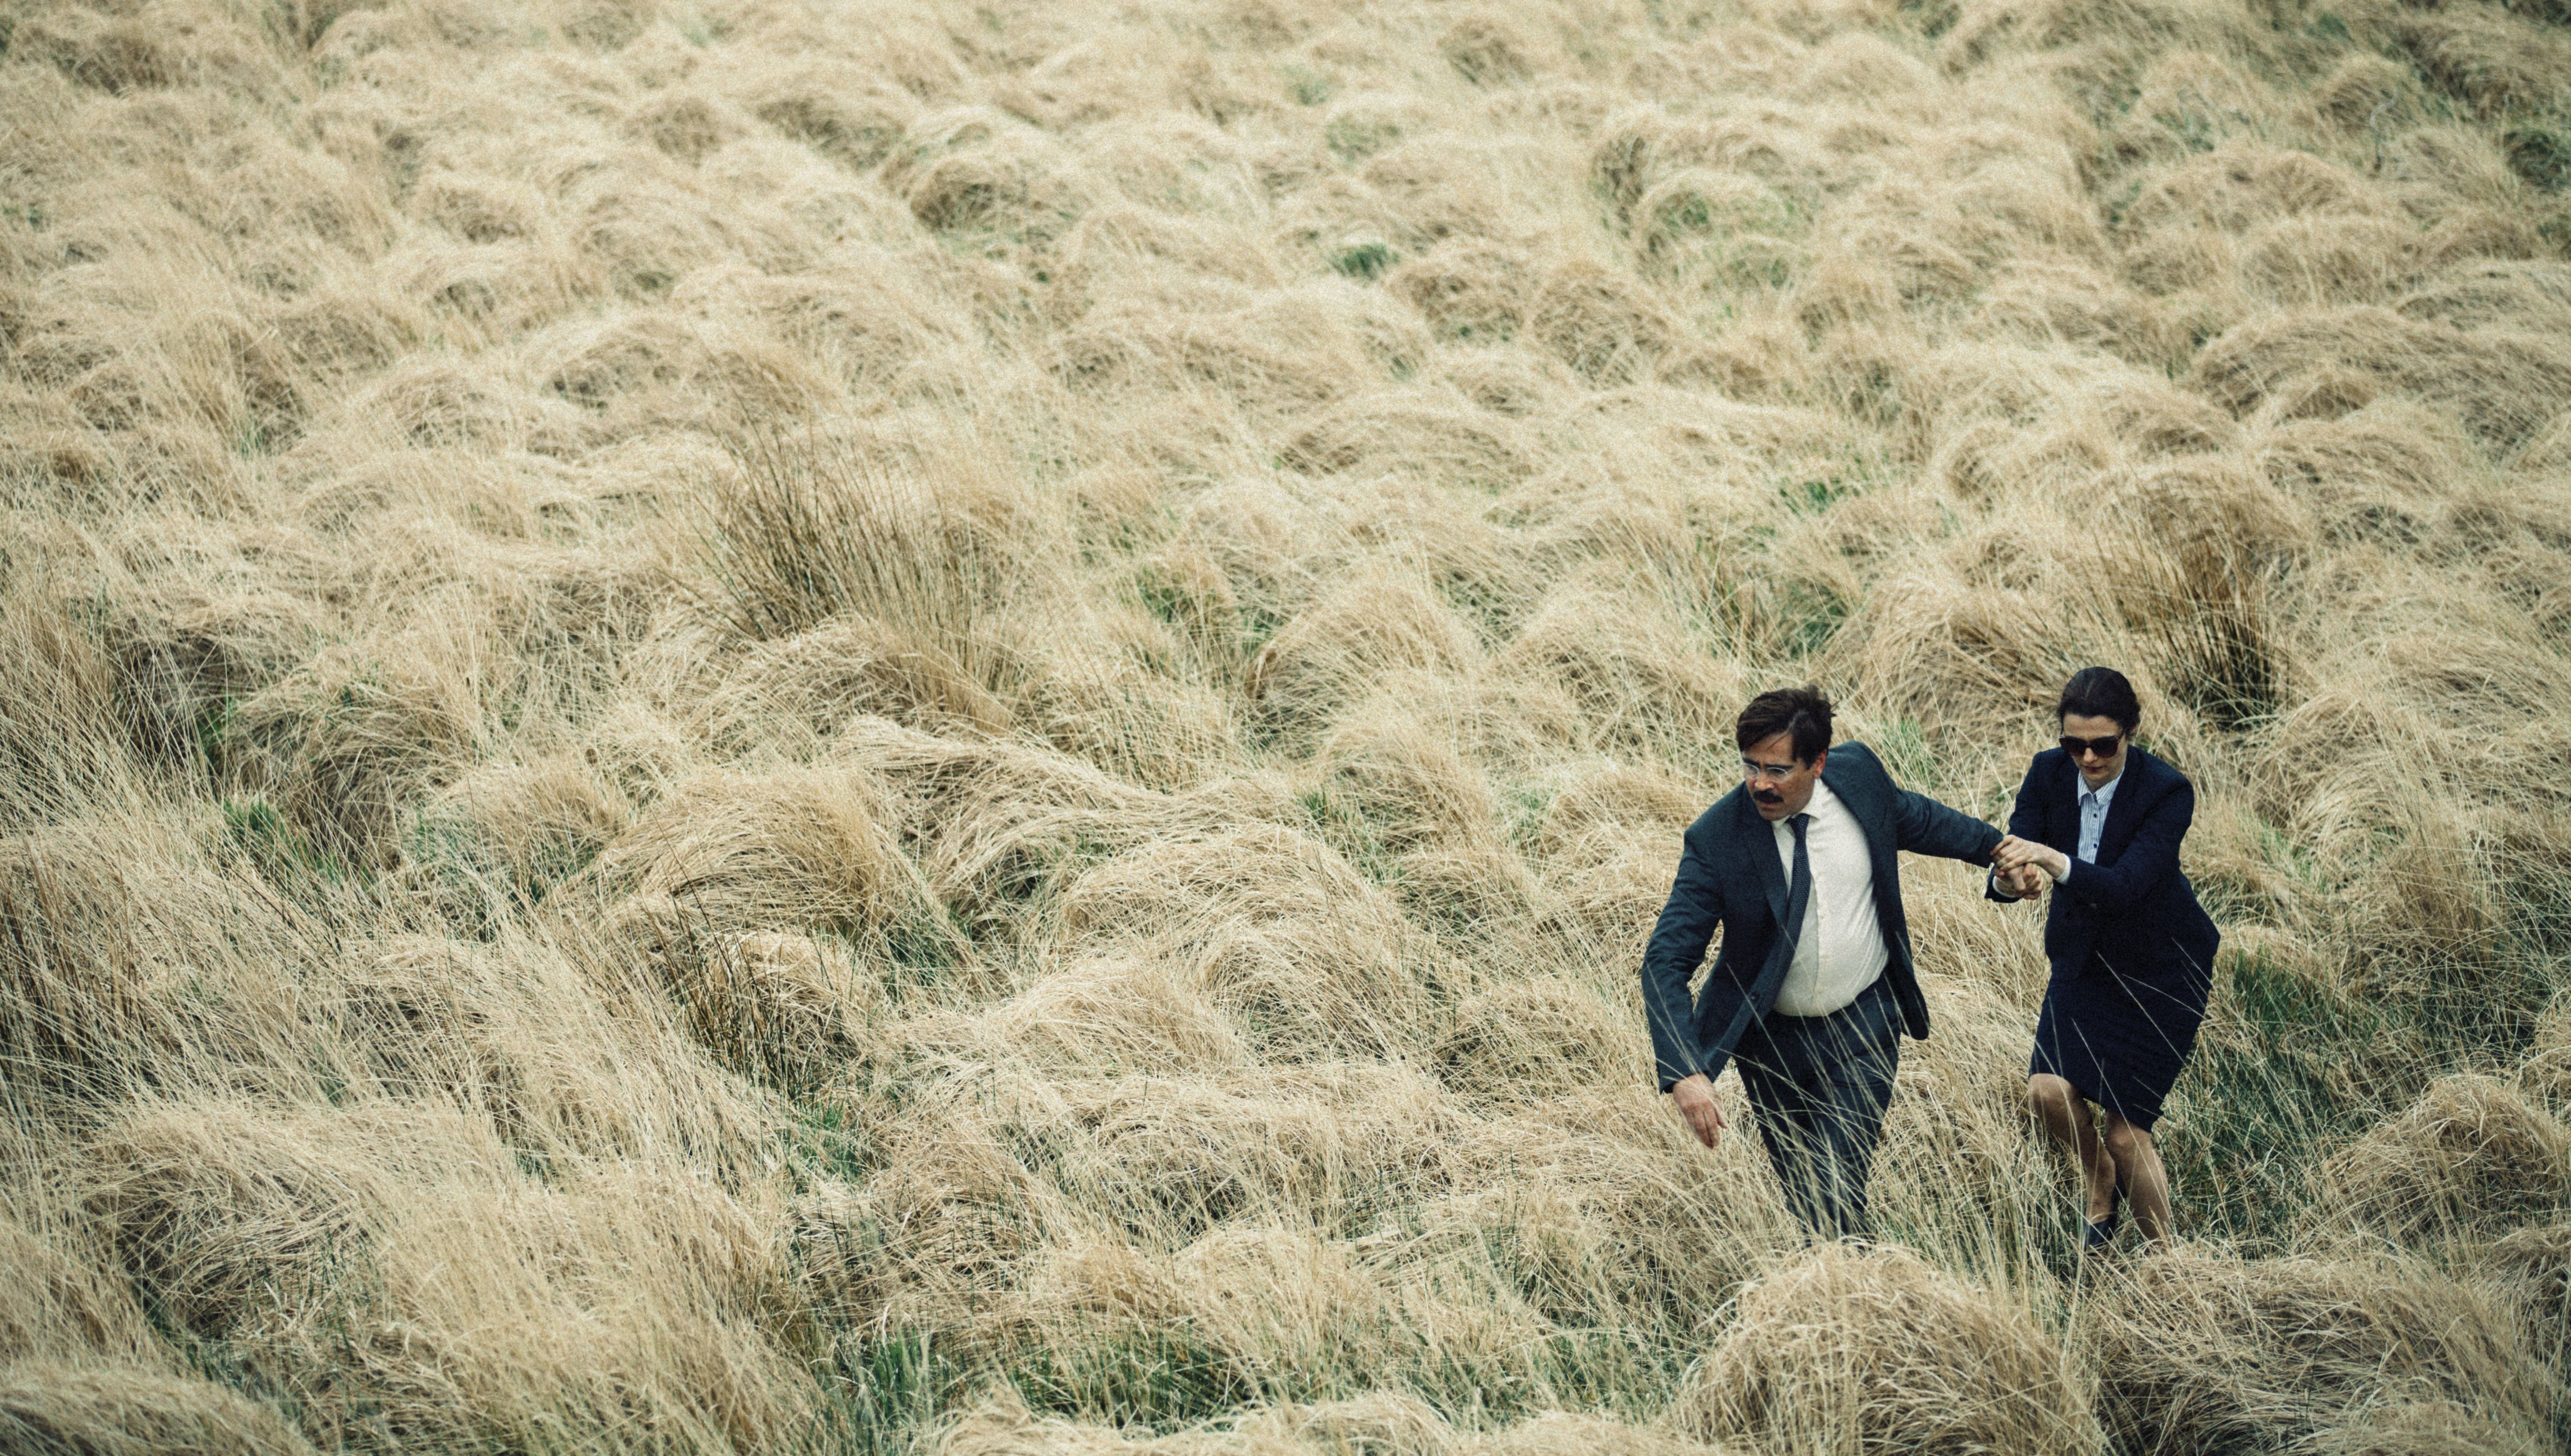 Colin Farrell and Rachel Weisz in big field in The Lobster